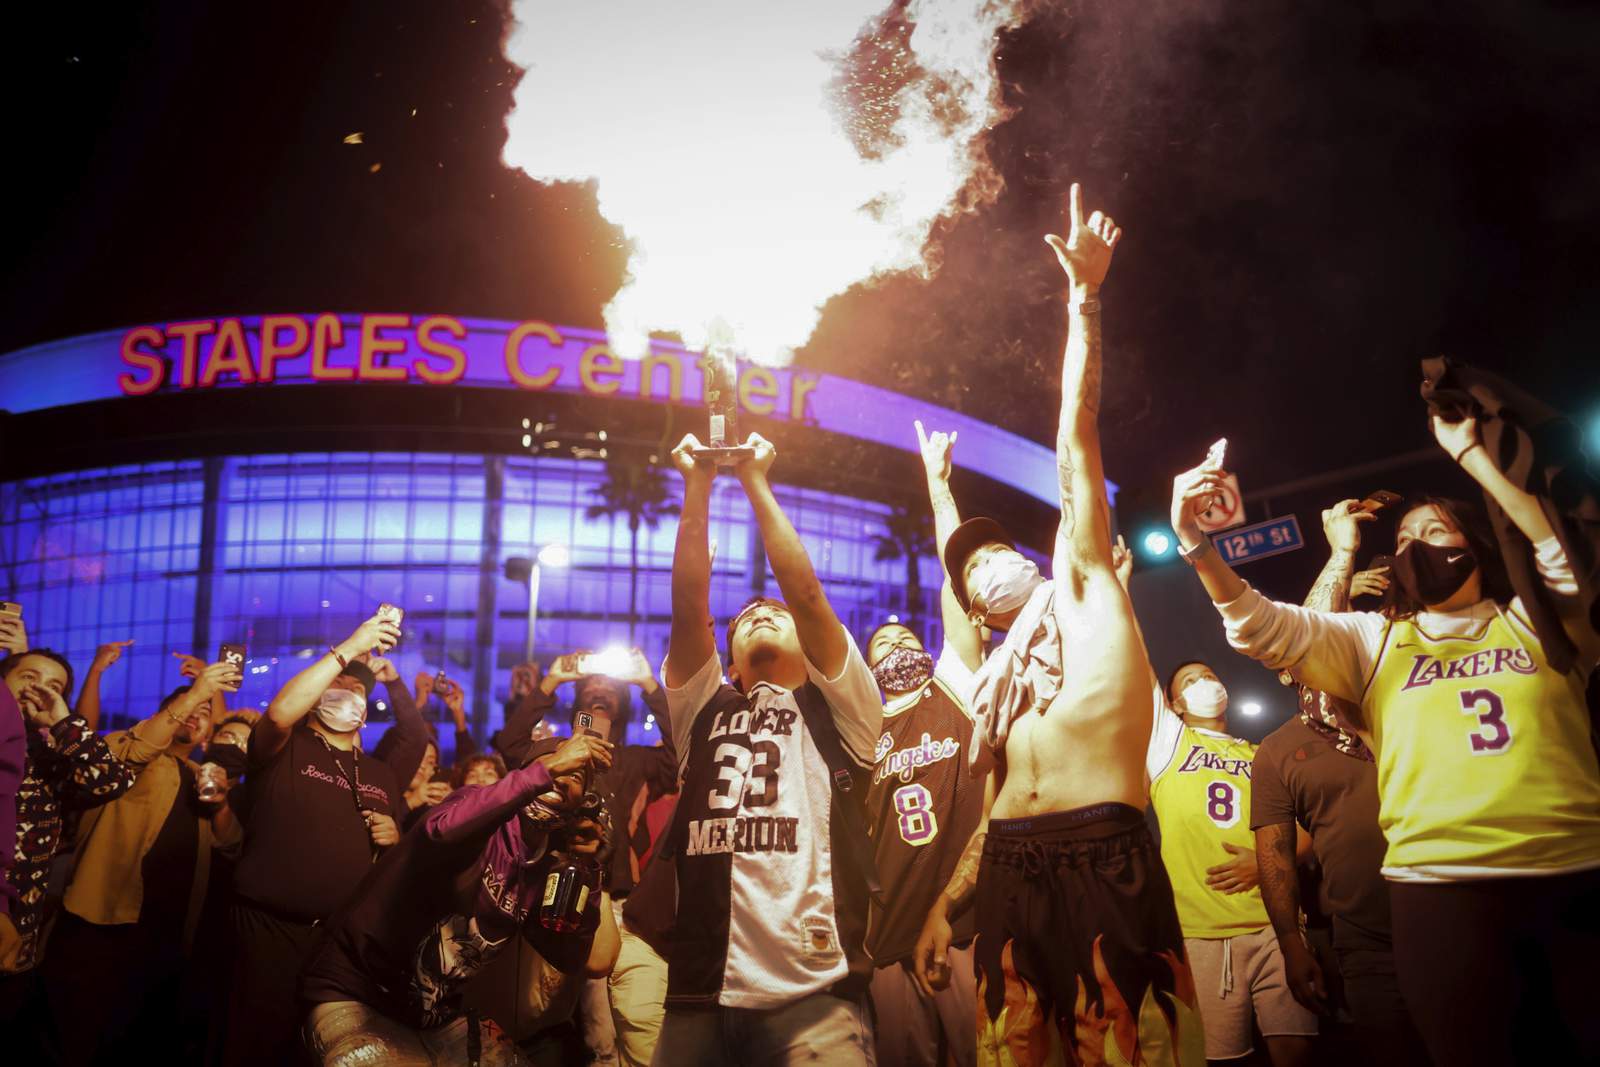 76 arrests as fans, some rowdy, cheer Lakers win in LA